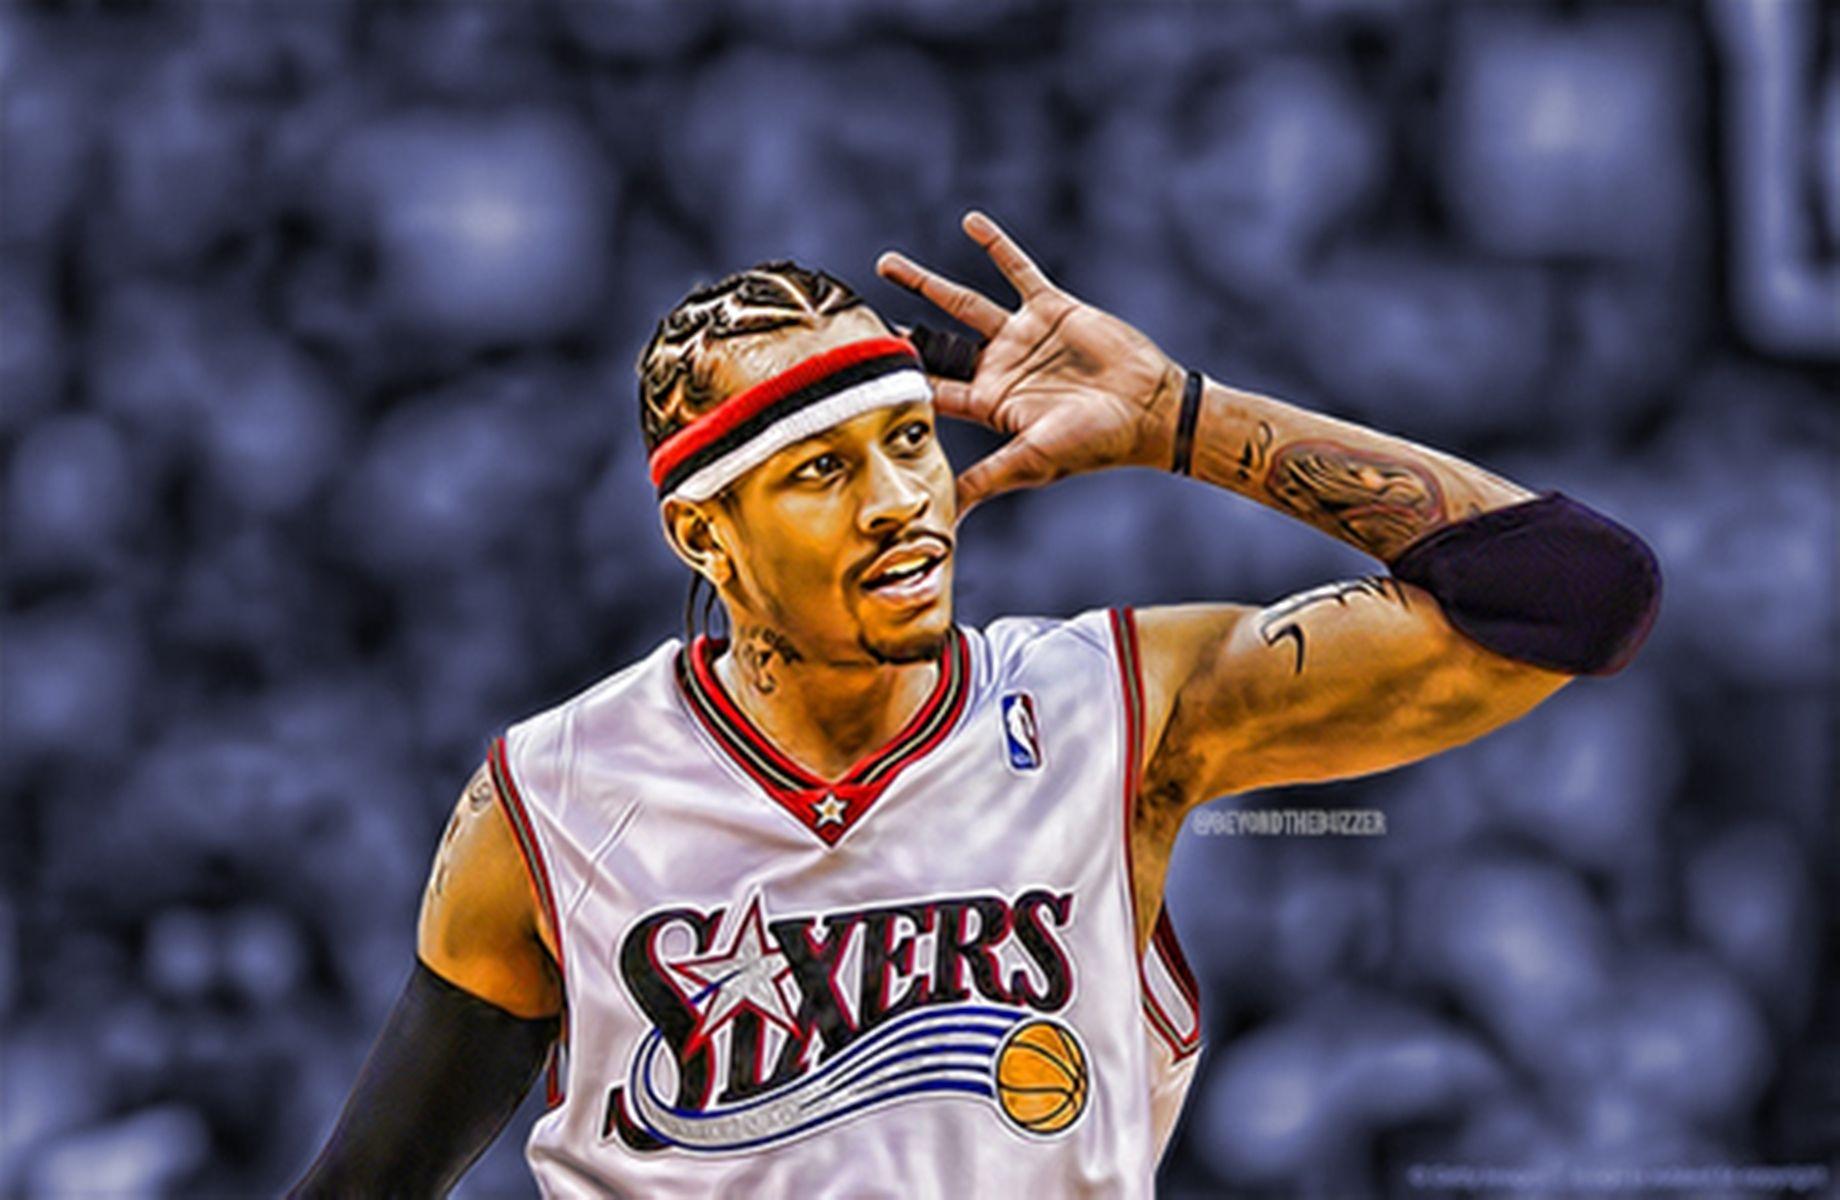 iPhoneZone: Allen Iverson Basketball Player: iPhone Wallpapers